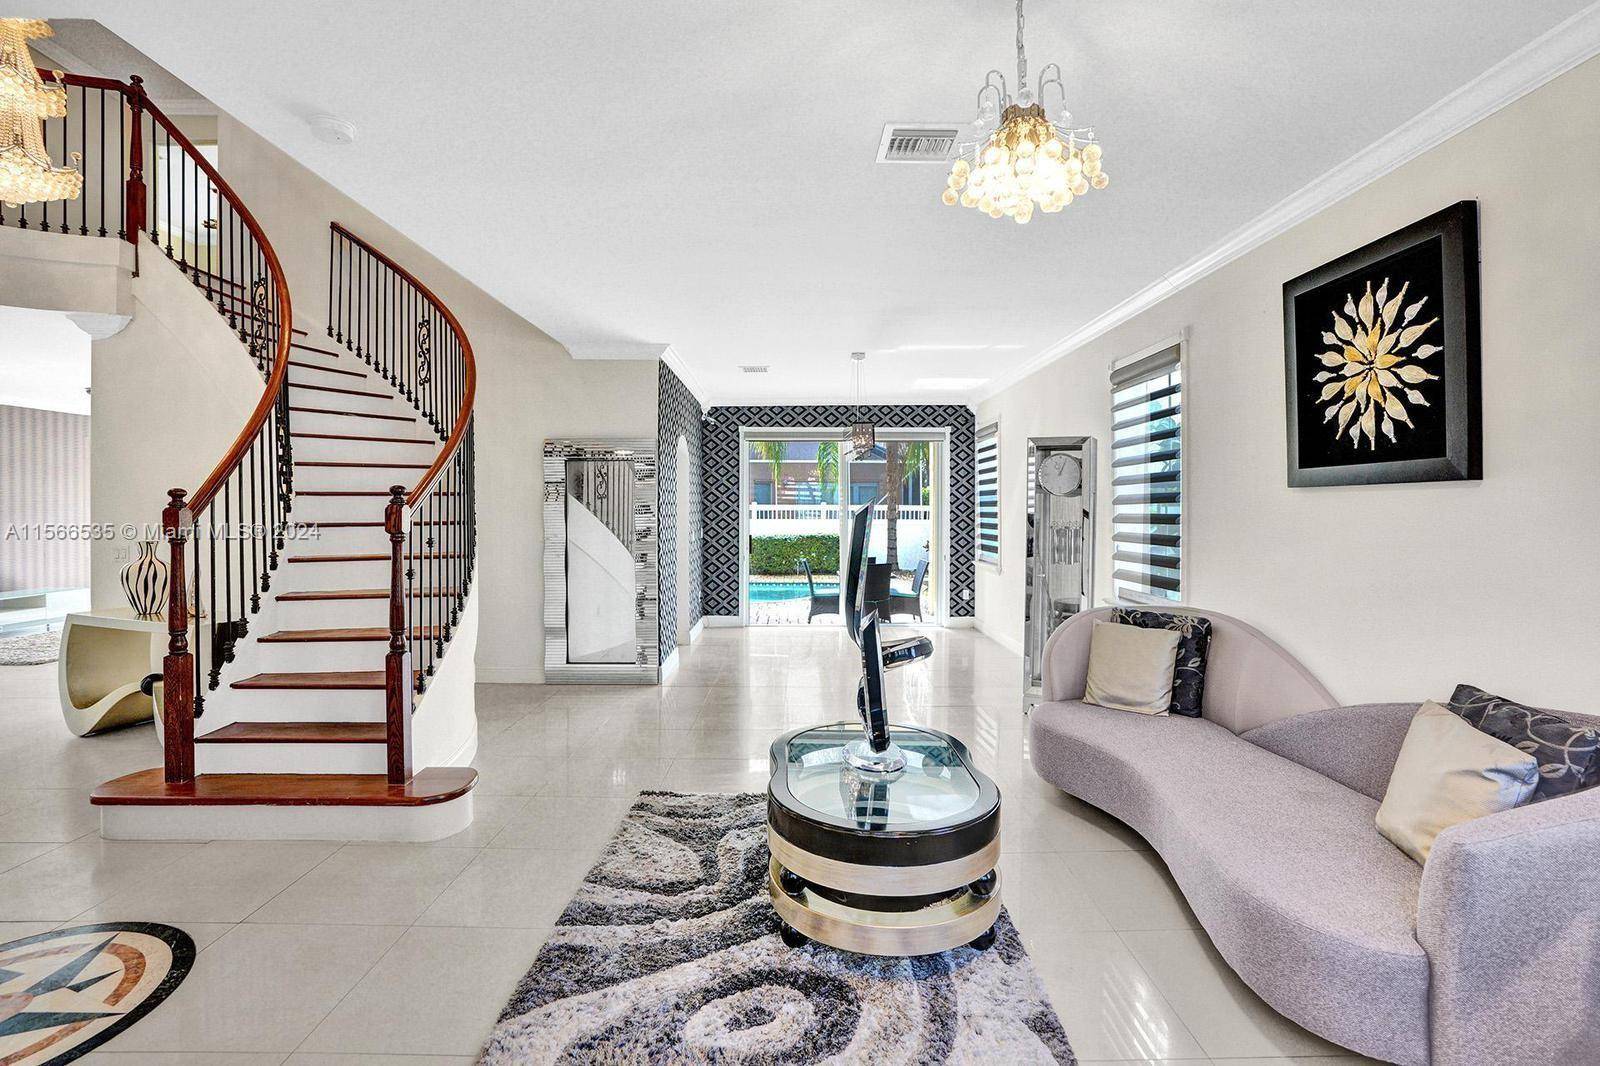 Step into the coveted Riviera Isles community in West Miramar and discover this spacious gem !